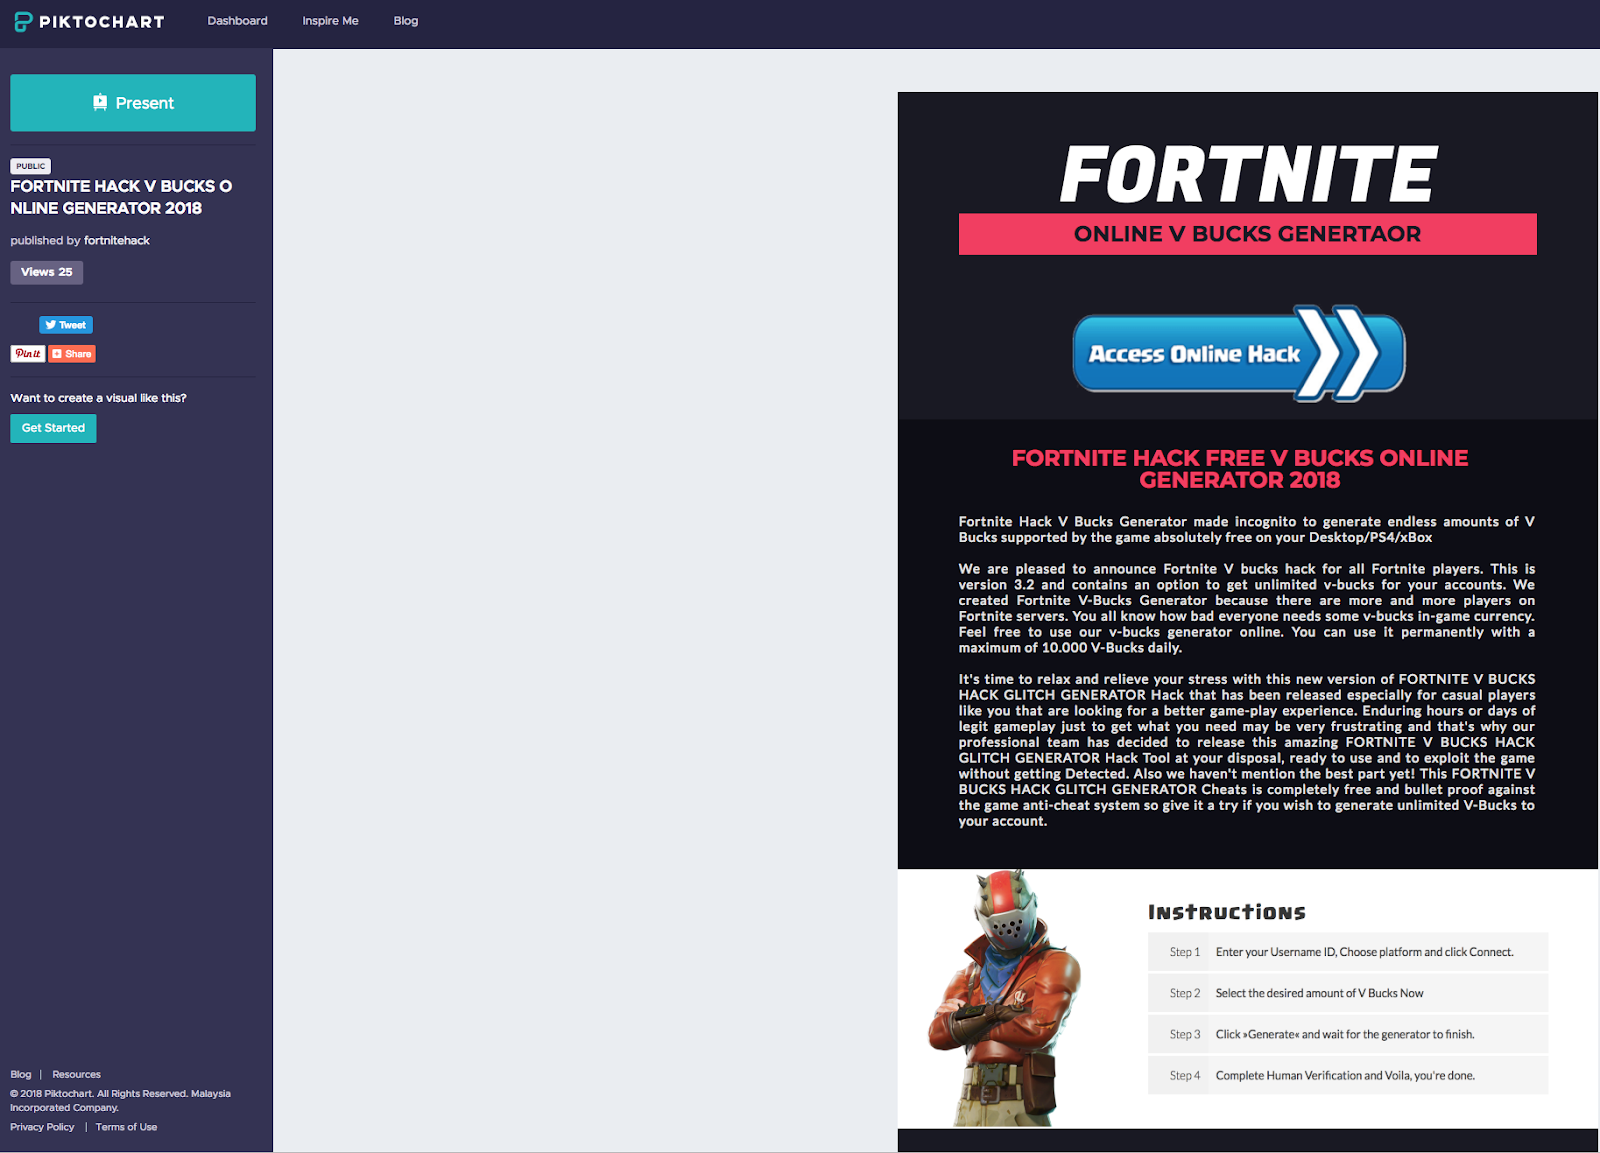 after all who d take the time to build a beautiful generator that doesn t work - fortnite account generator working 2019